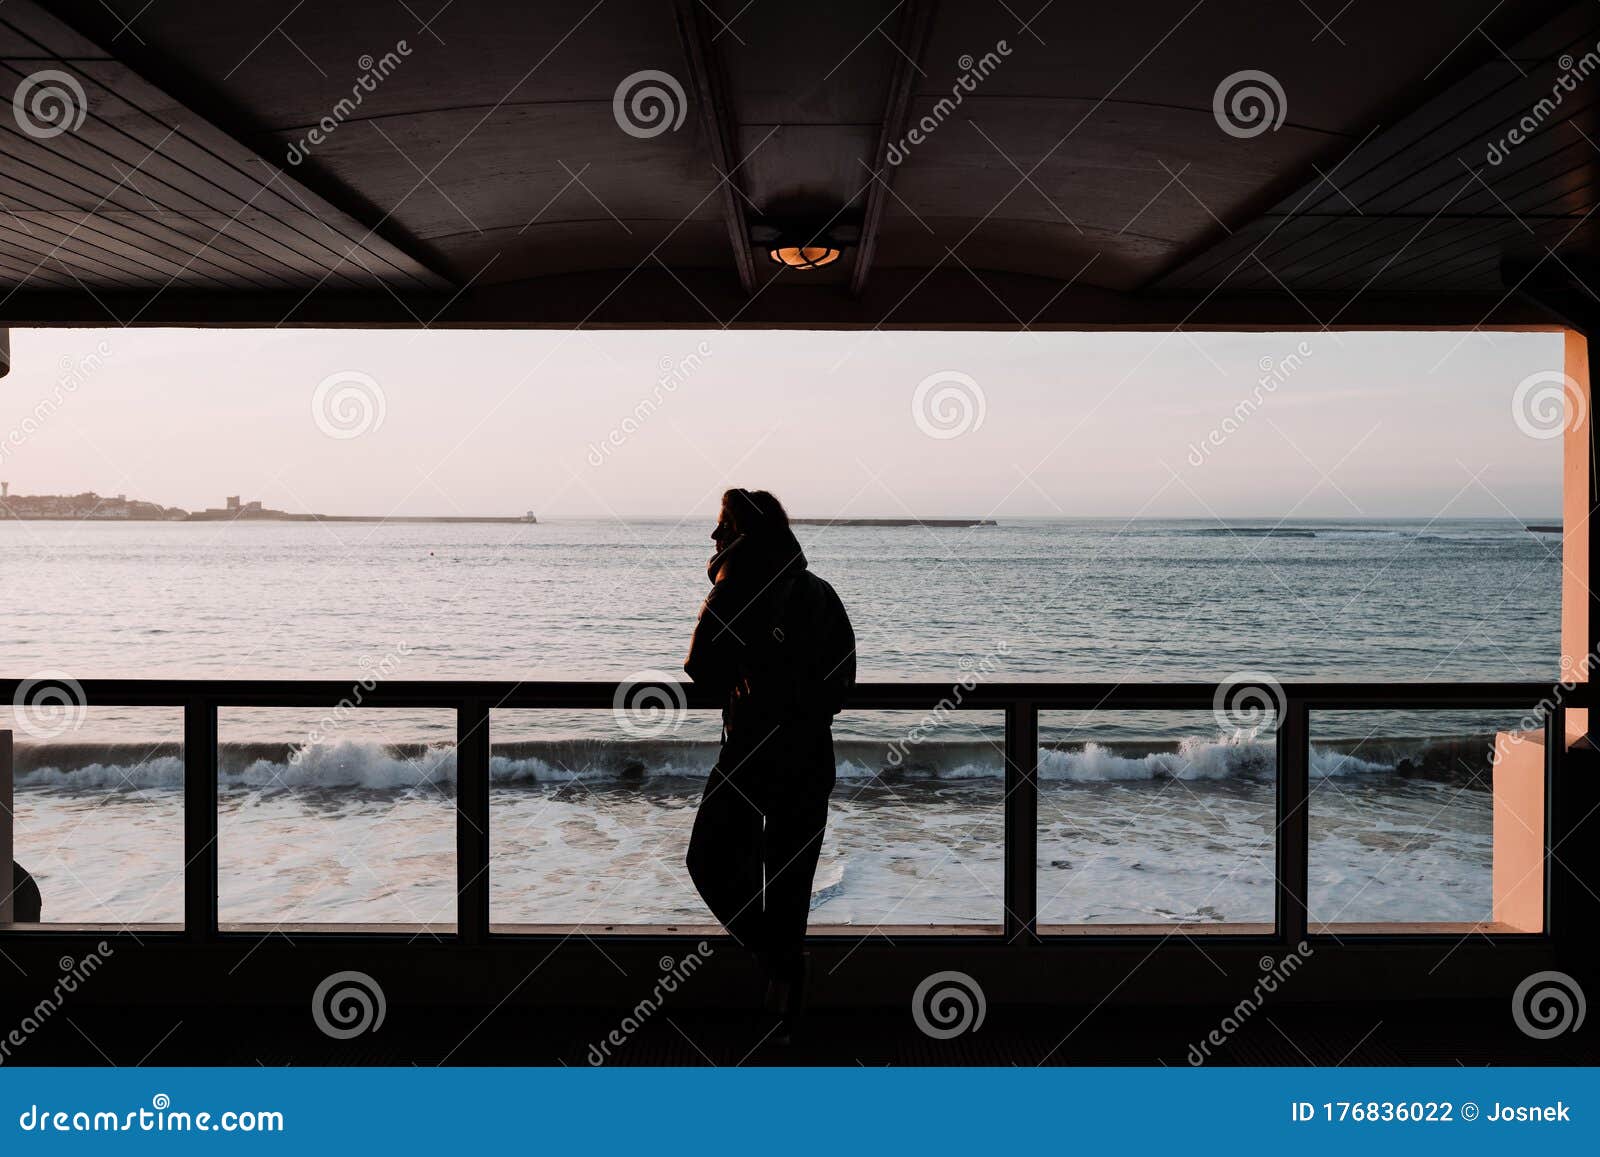 woman enjoying the sea from a viewpoint at sunset